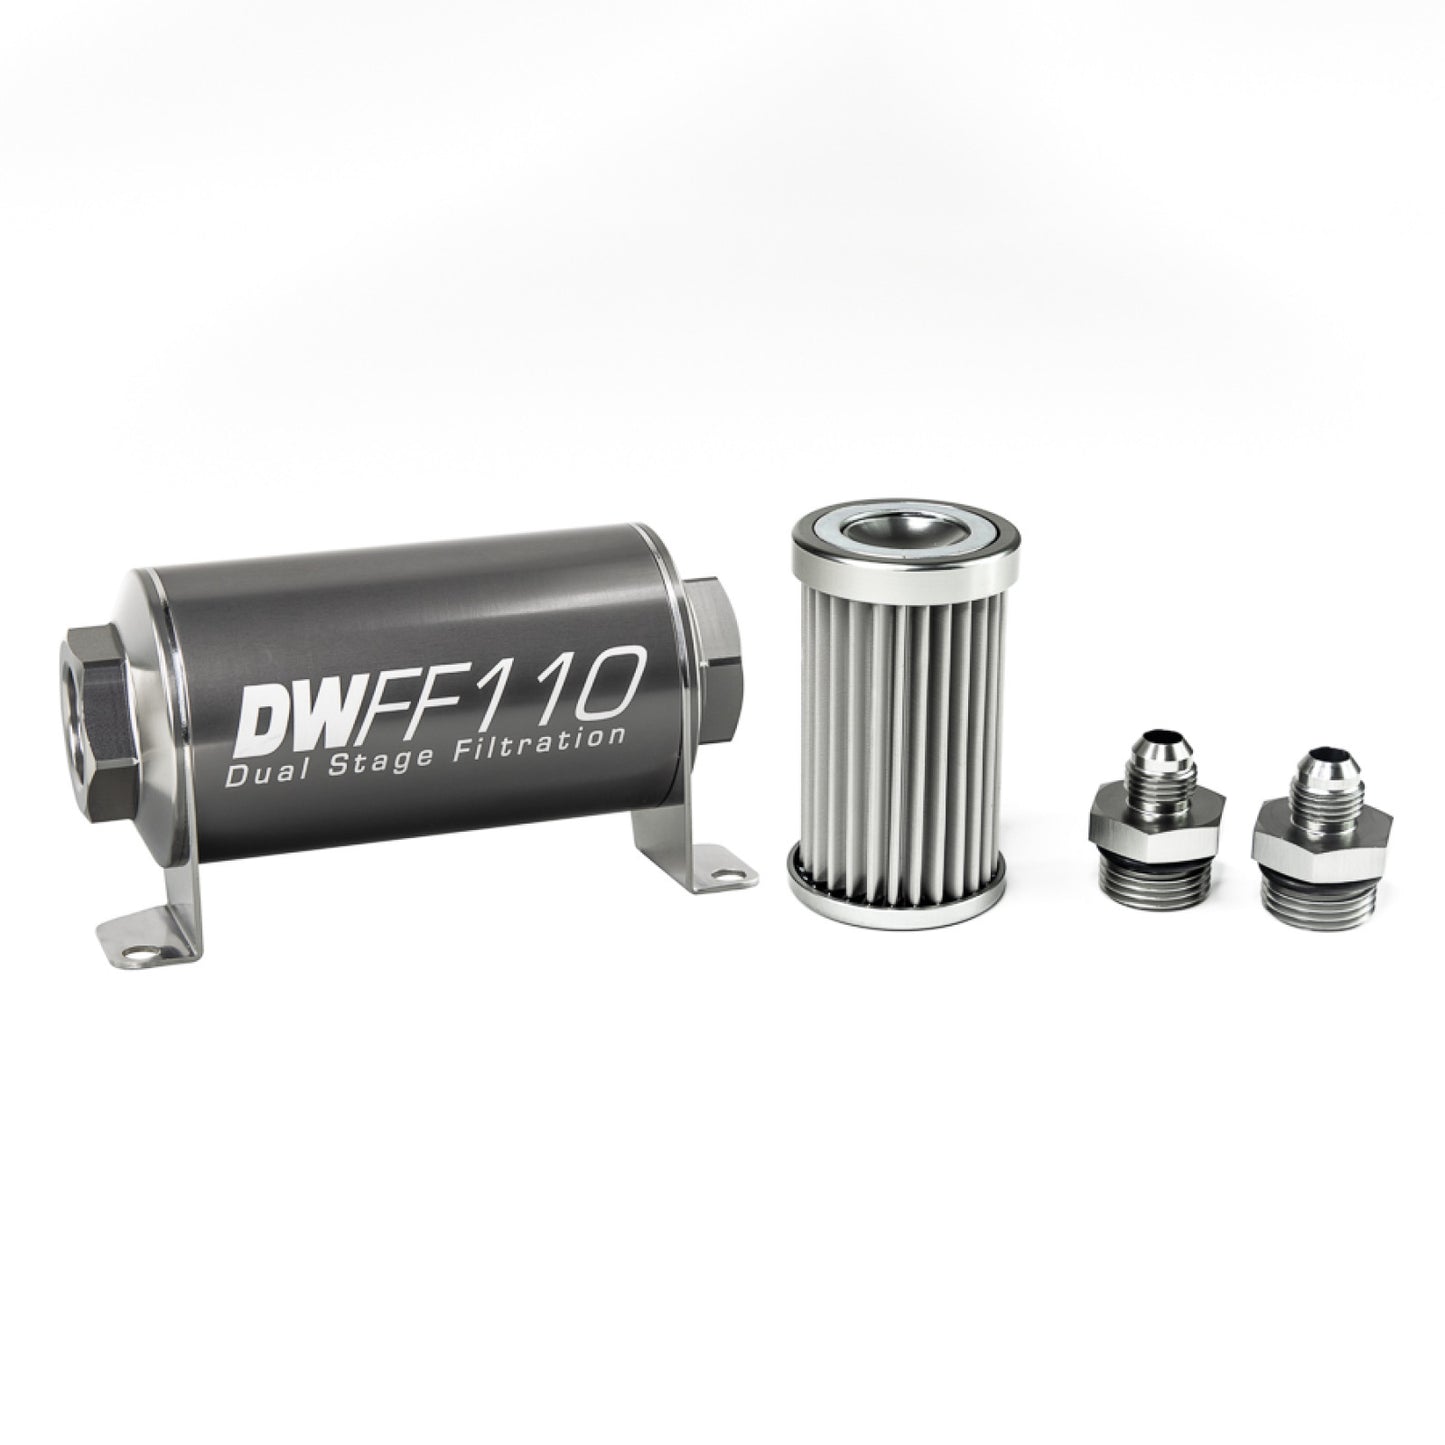 Deatschwerks In-line fuel filter element and housing kit, stainless steel 5 micron, -6AN, 110mm. Universal